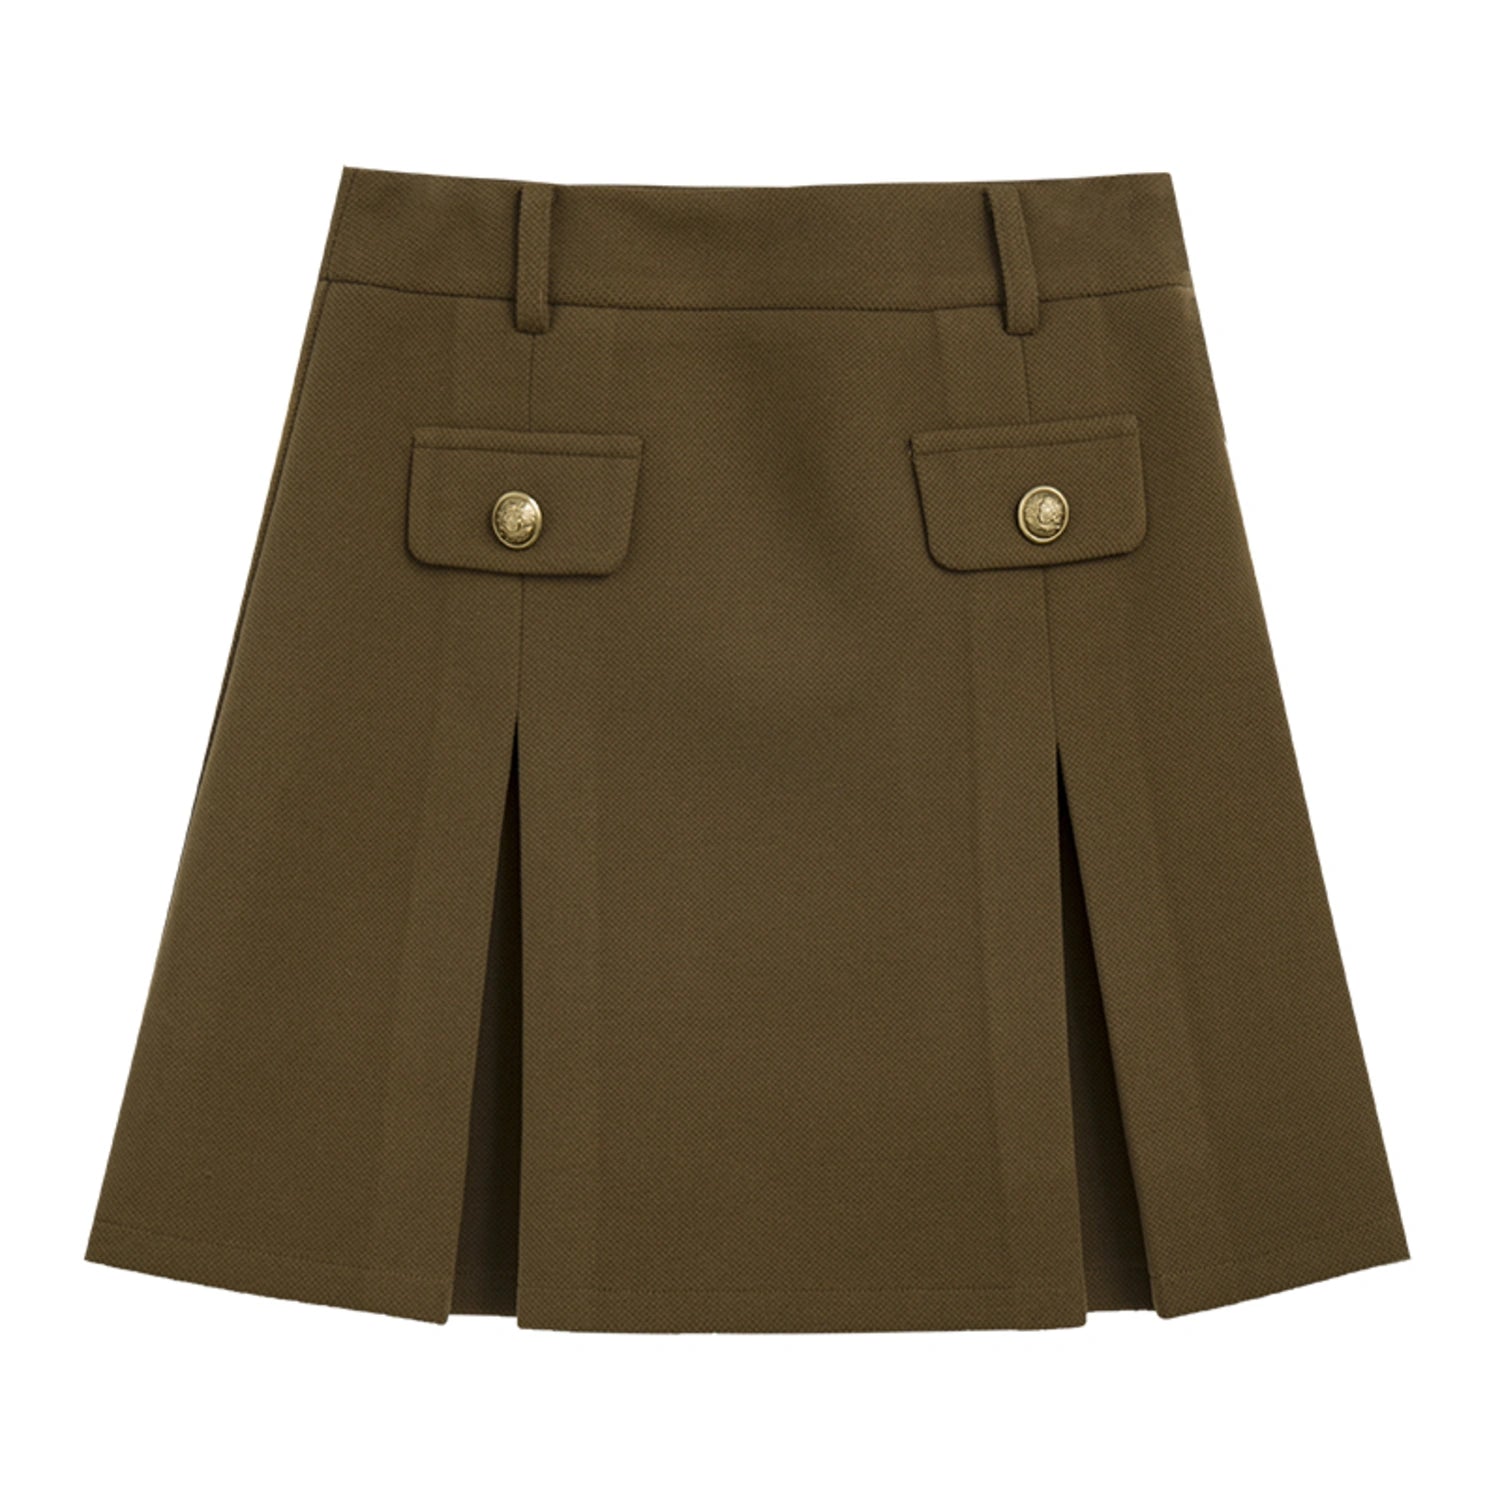 Sophisticated Button-Detail A-Line Skirt with Pockets